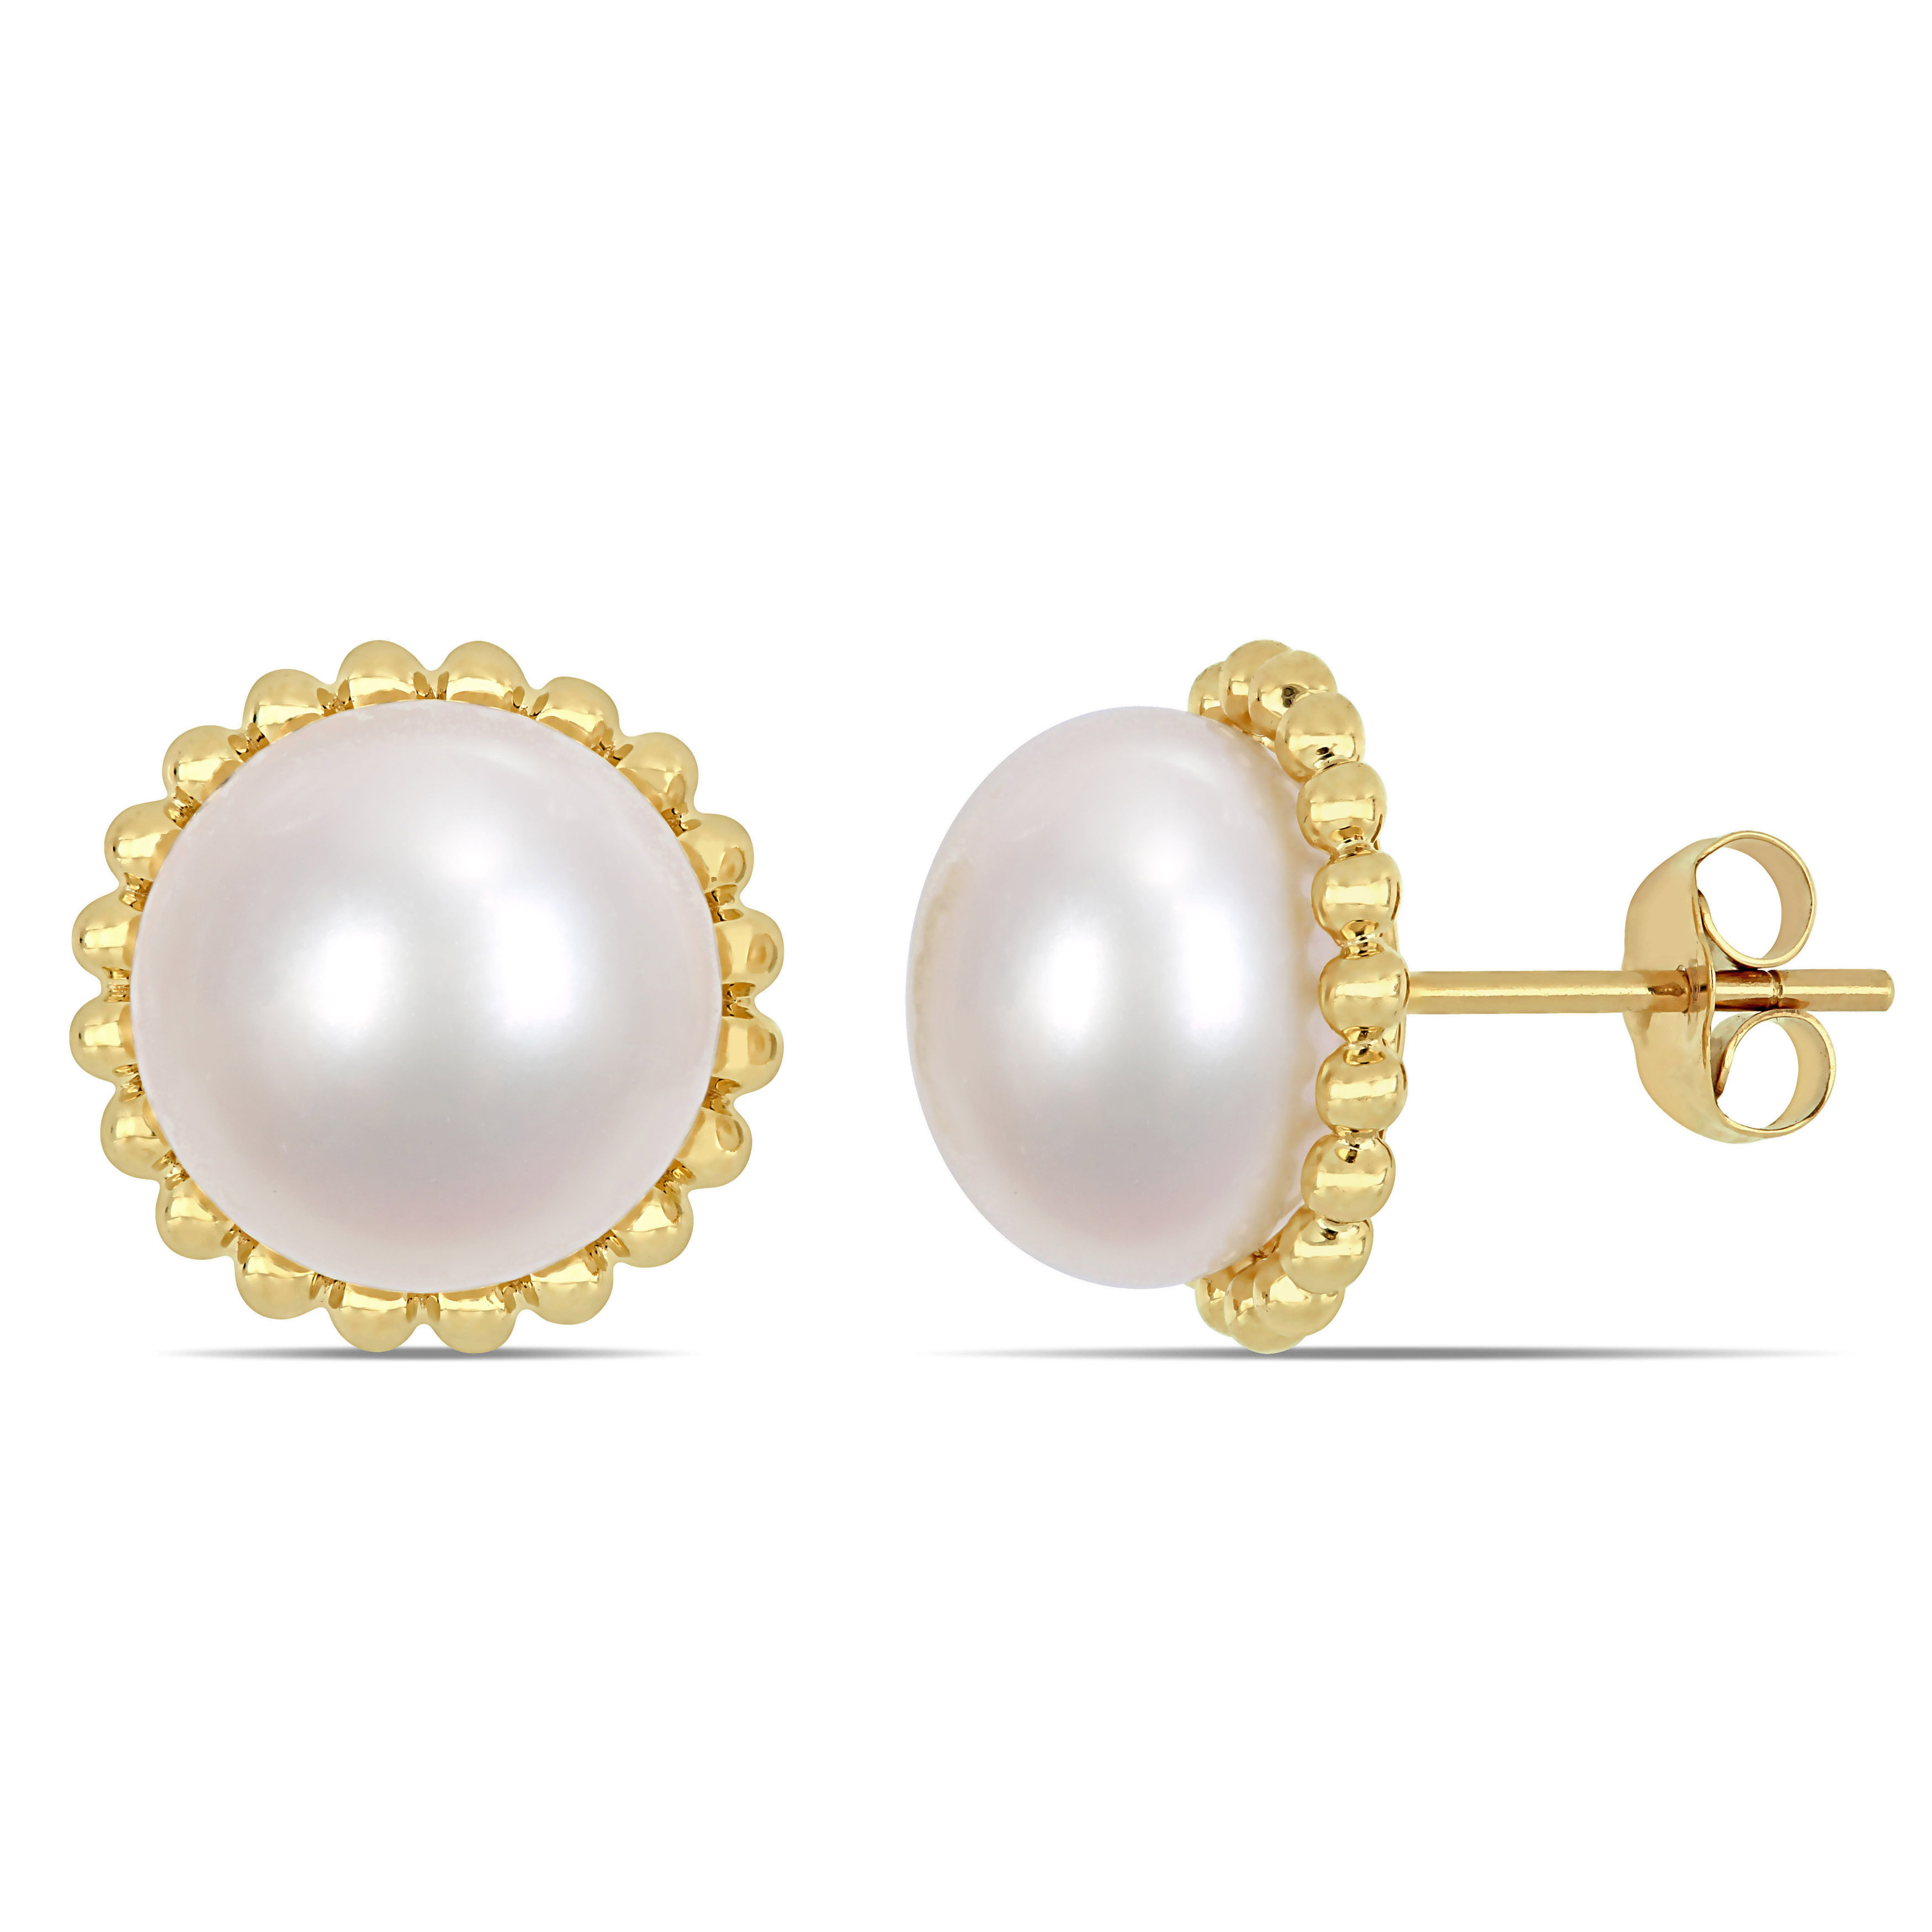 10.5 - 11 MM Cultured Freshwater Pearl Halo Stud Earrings in 10k Yellow Gold